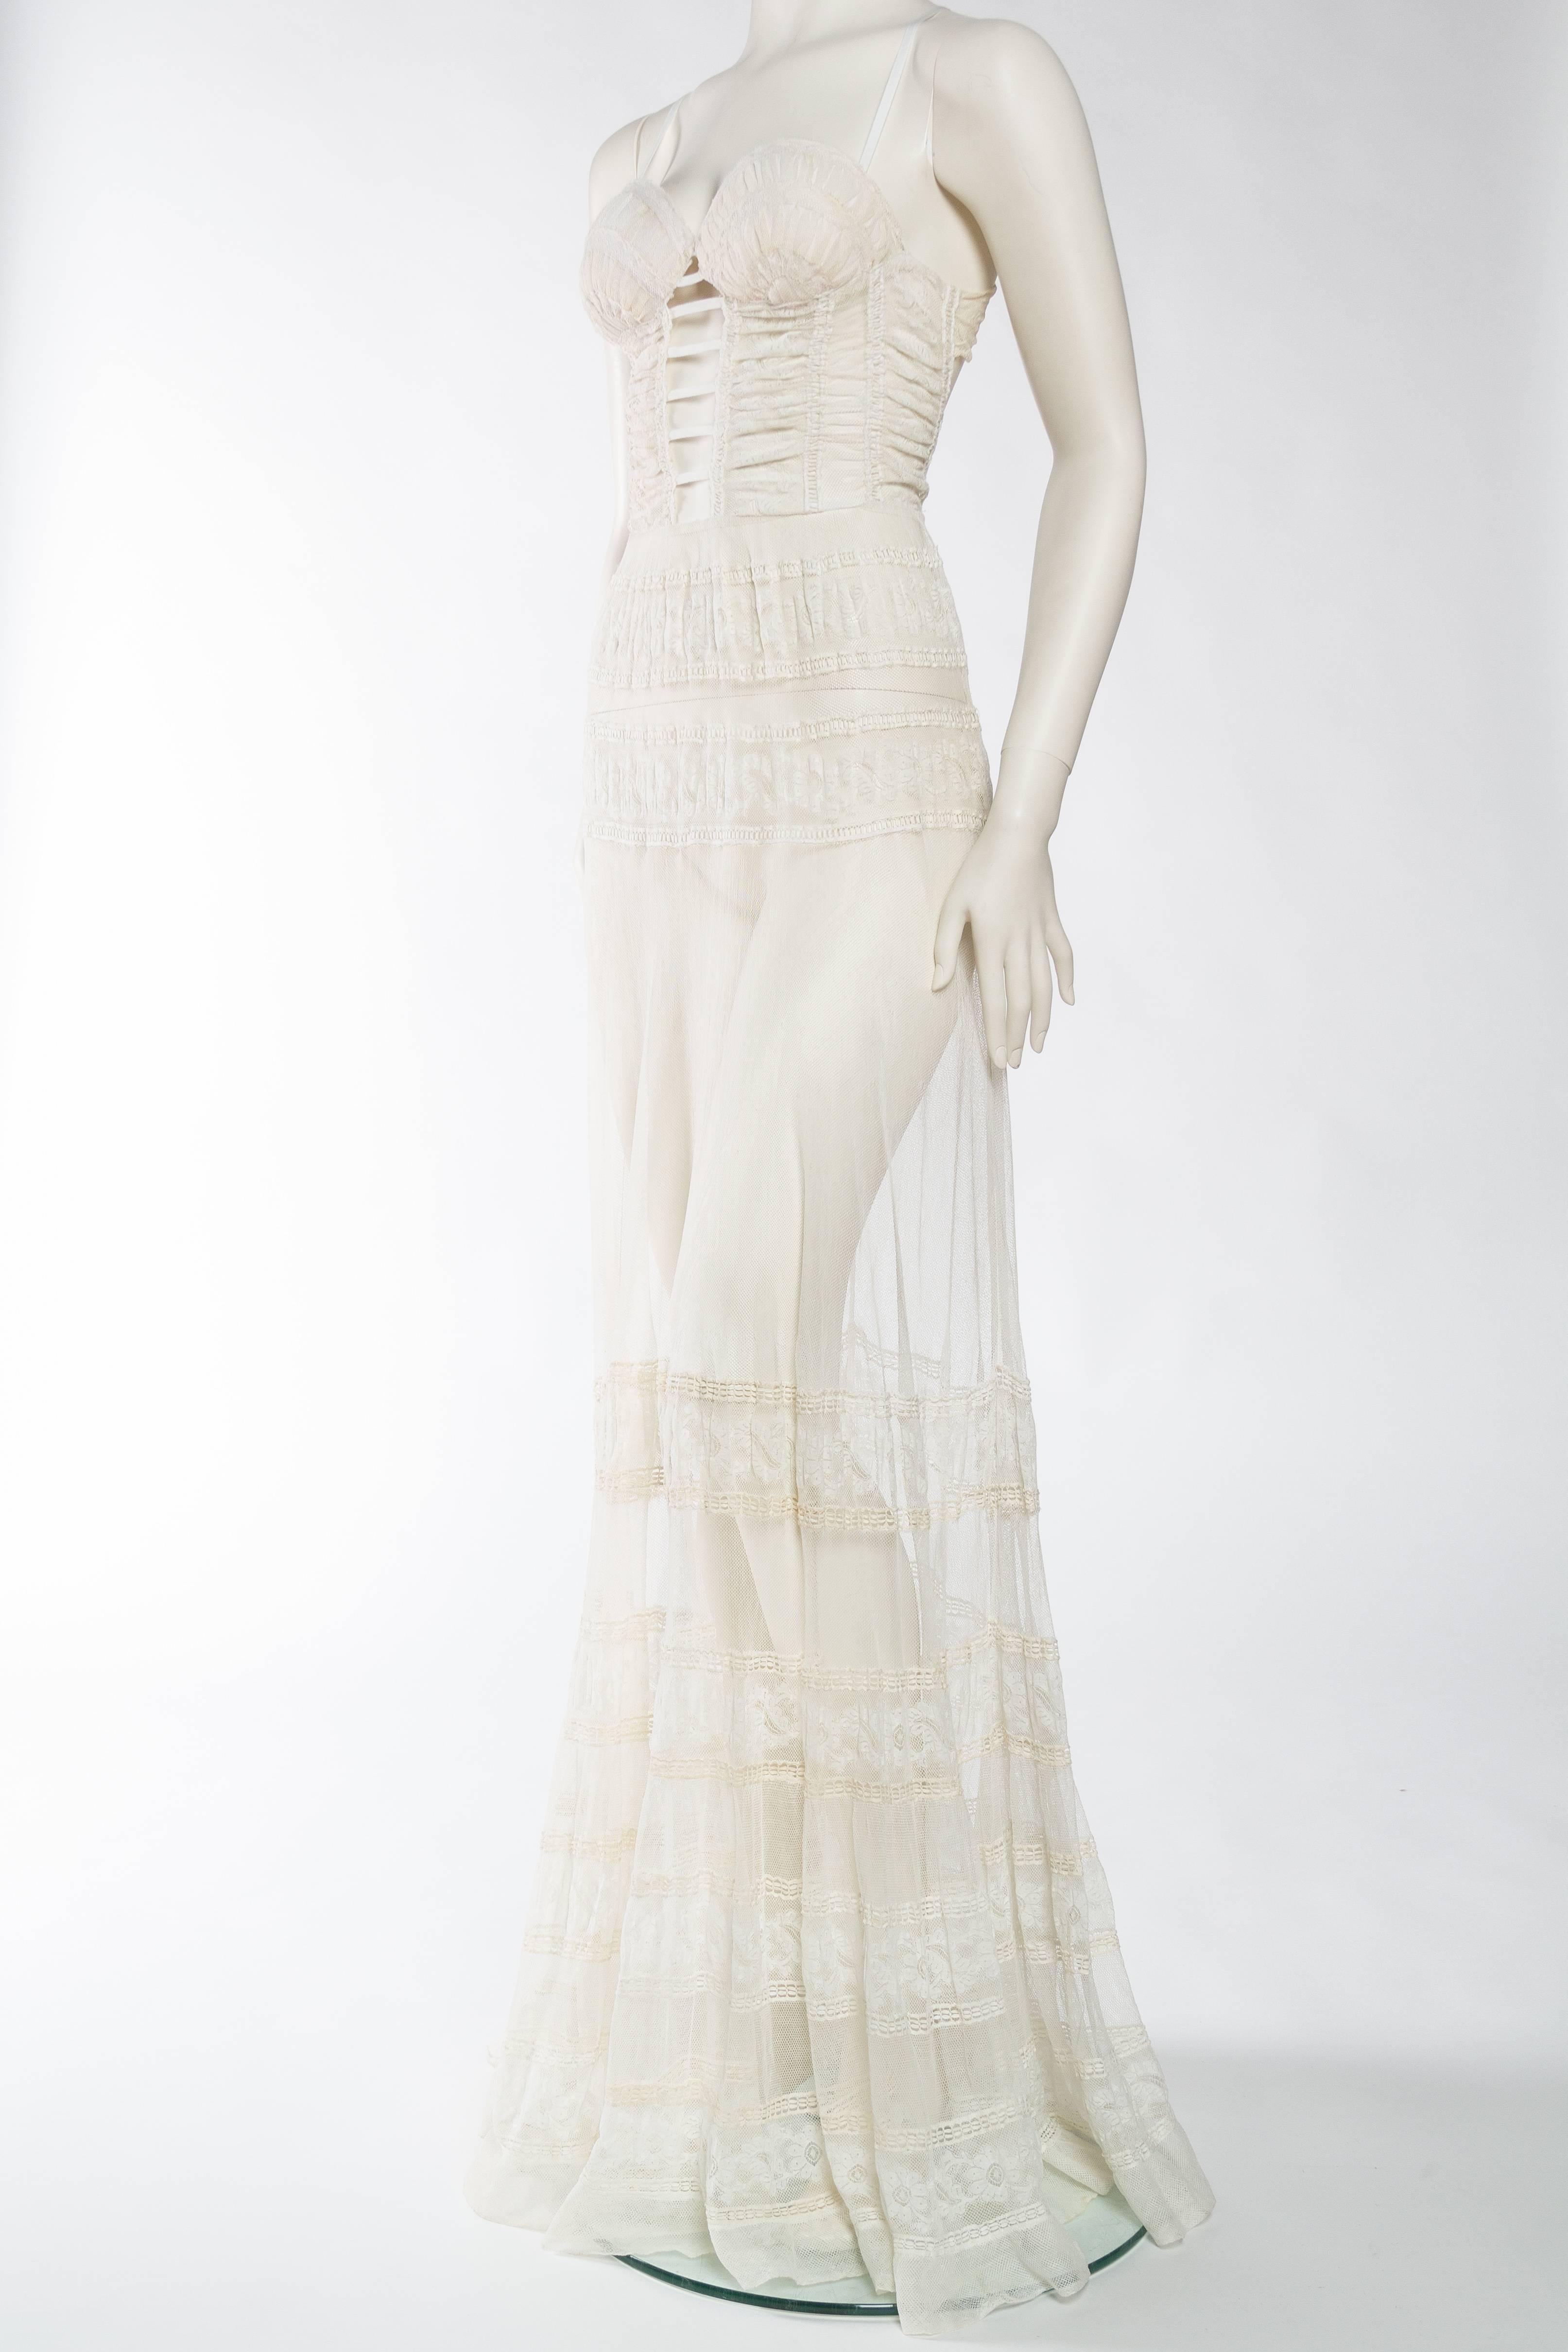 Rebuilt Victorian Net & Lace Tea Gown In Excellent Condition In New York, NY